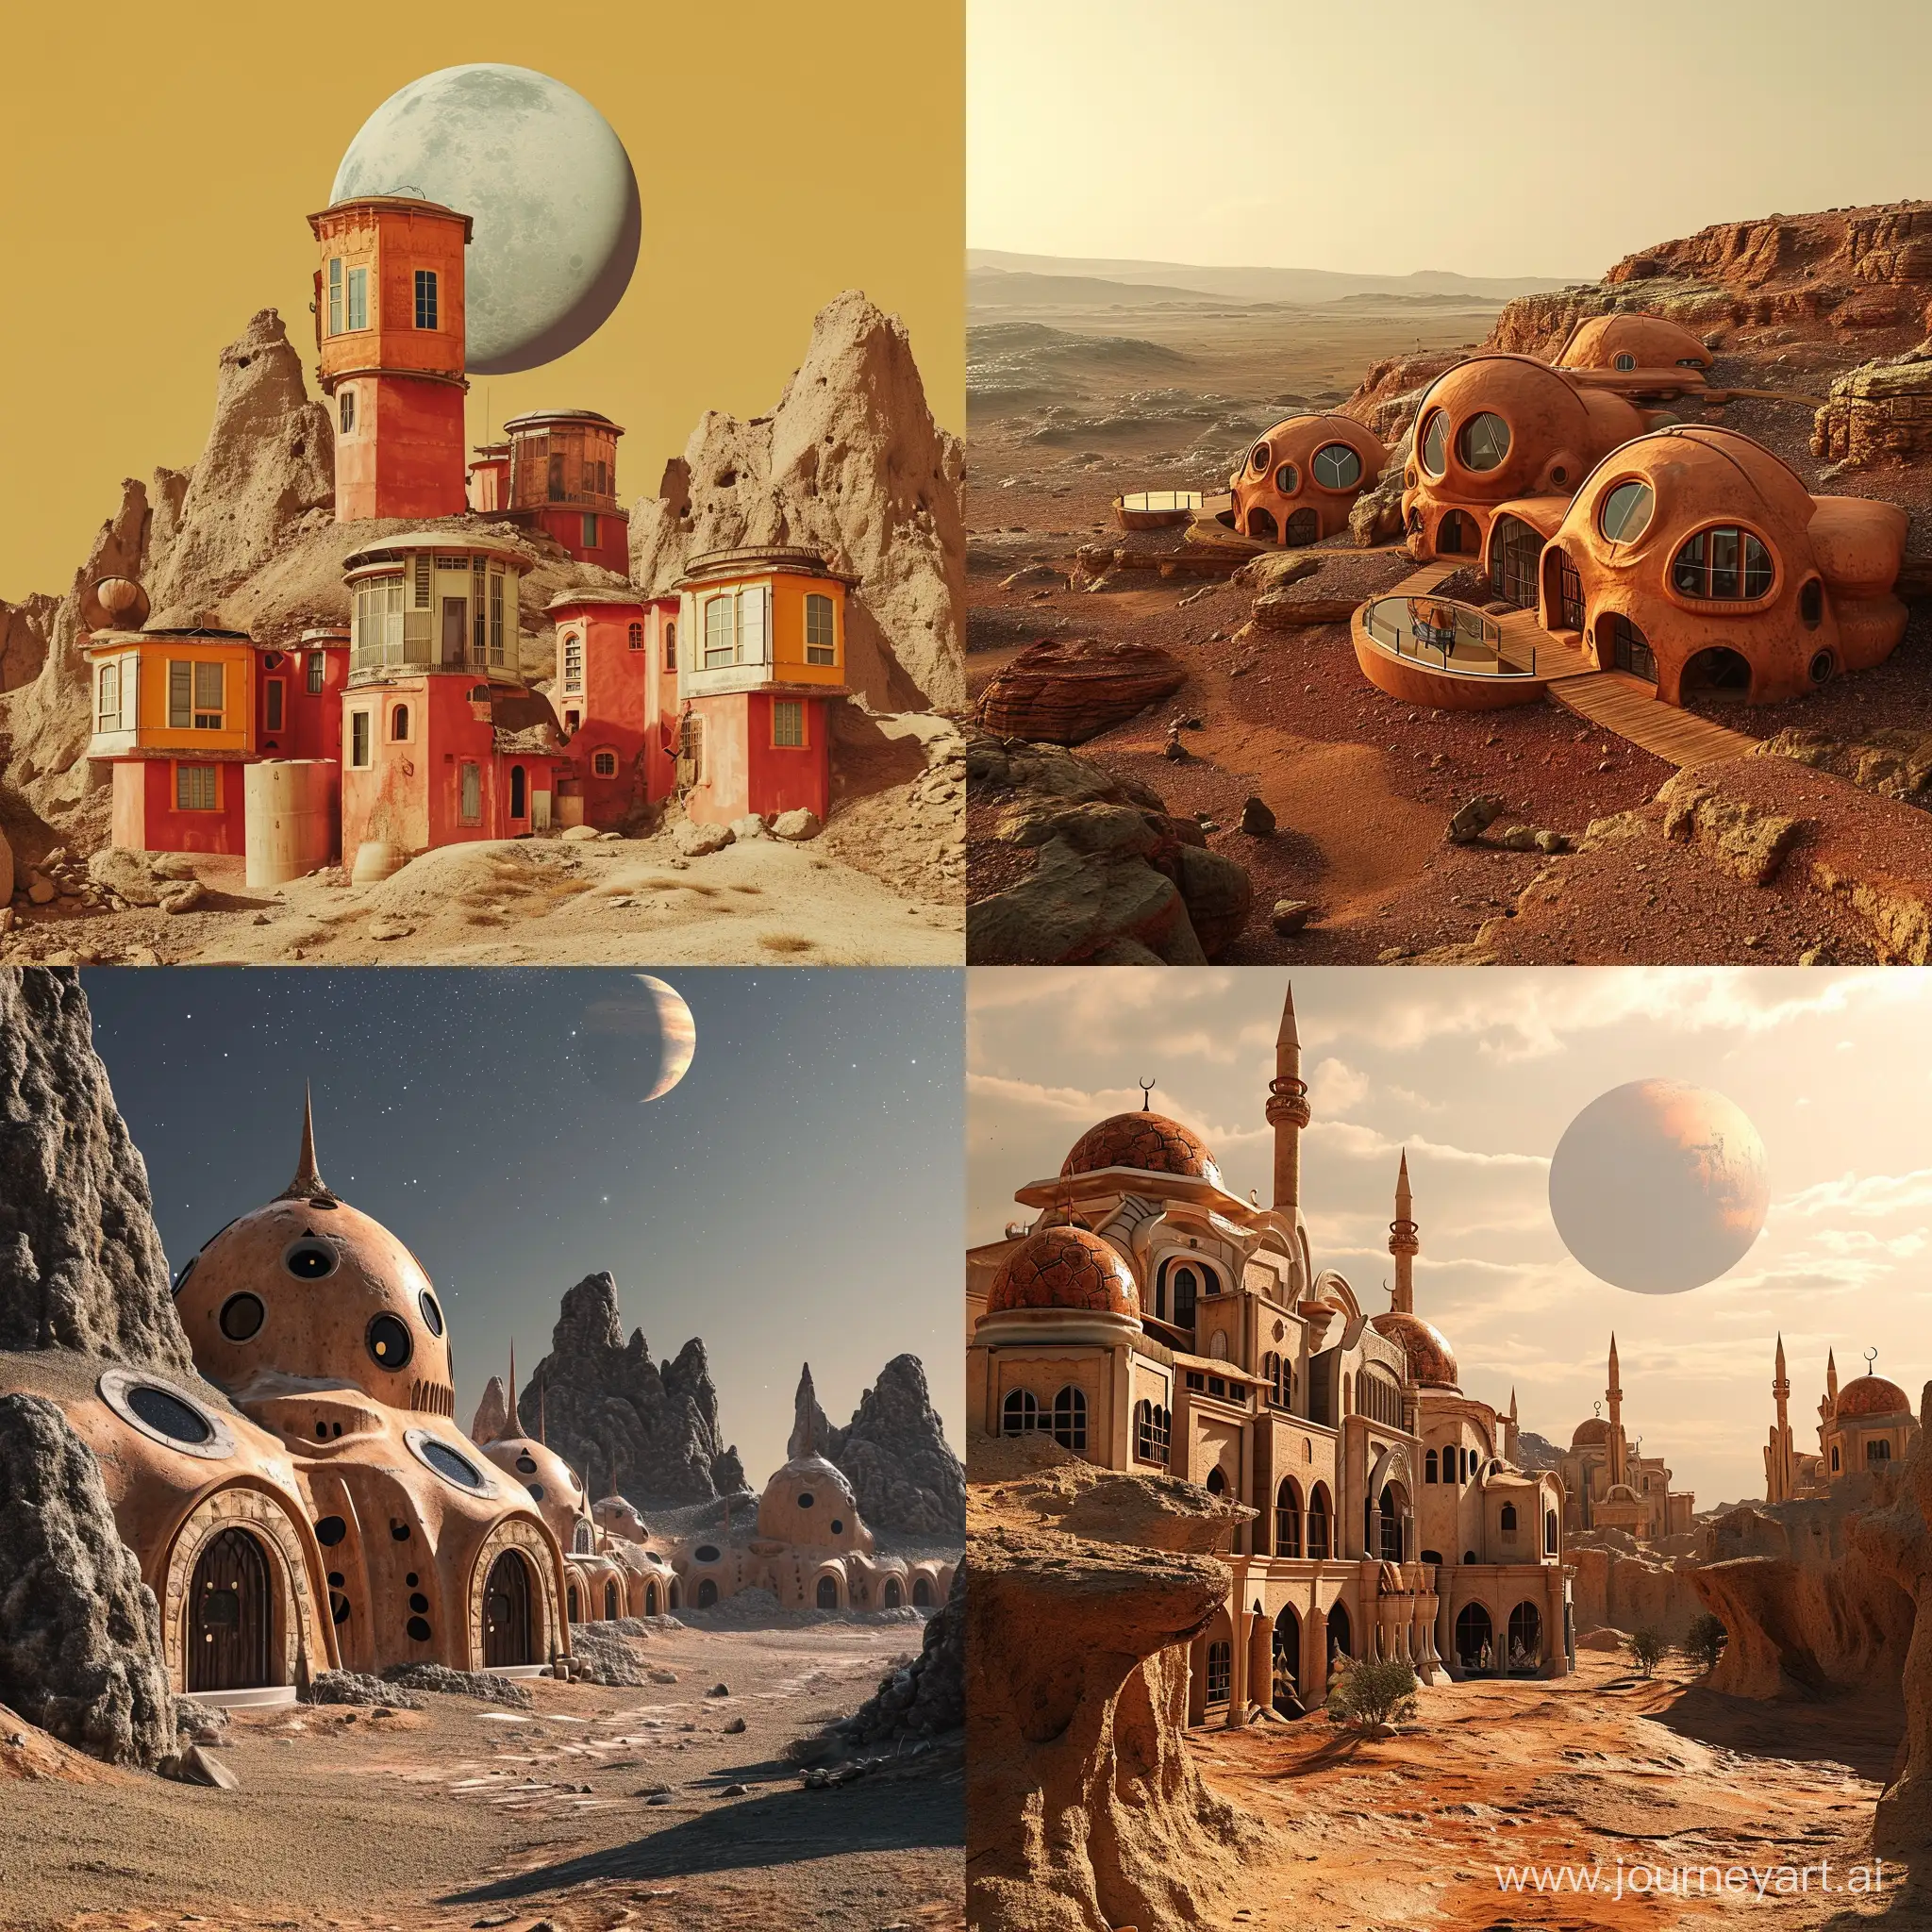 Turkish-Houses-on-Mars-Red-Planet-Living